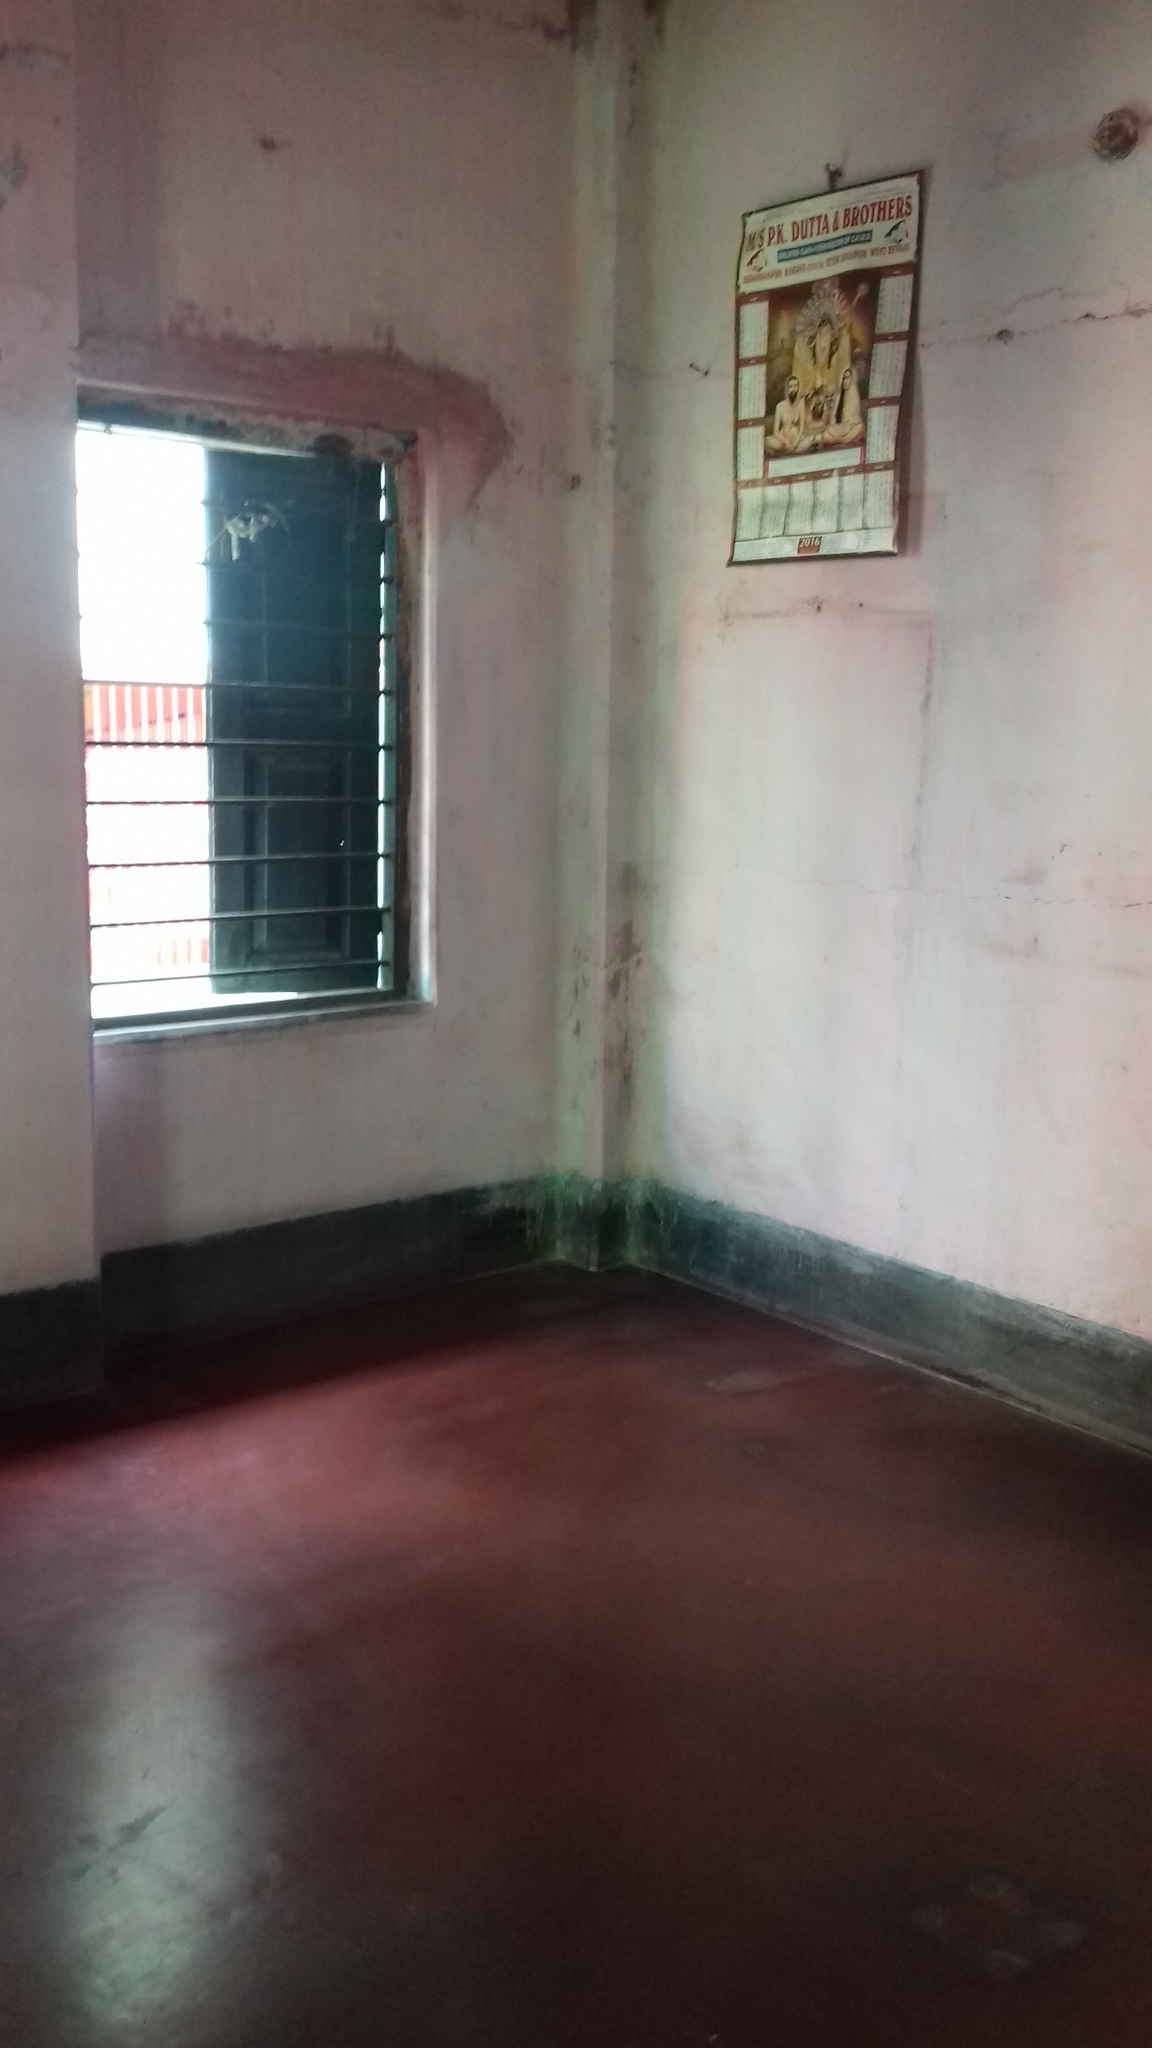 Office For Rent in Nager Bazar Kolkata (Id: 12934)